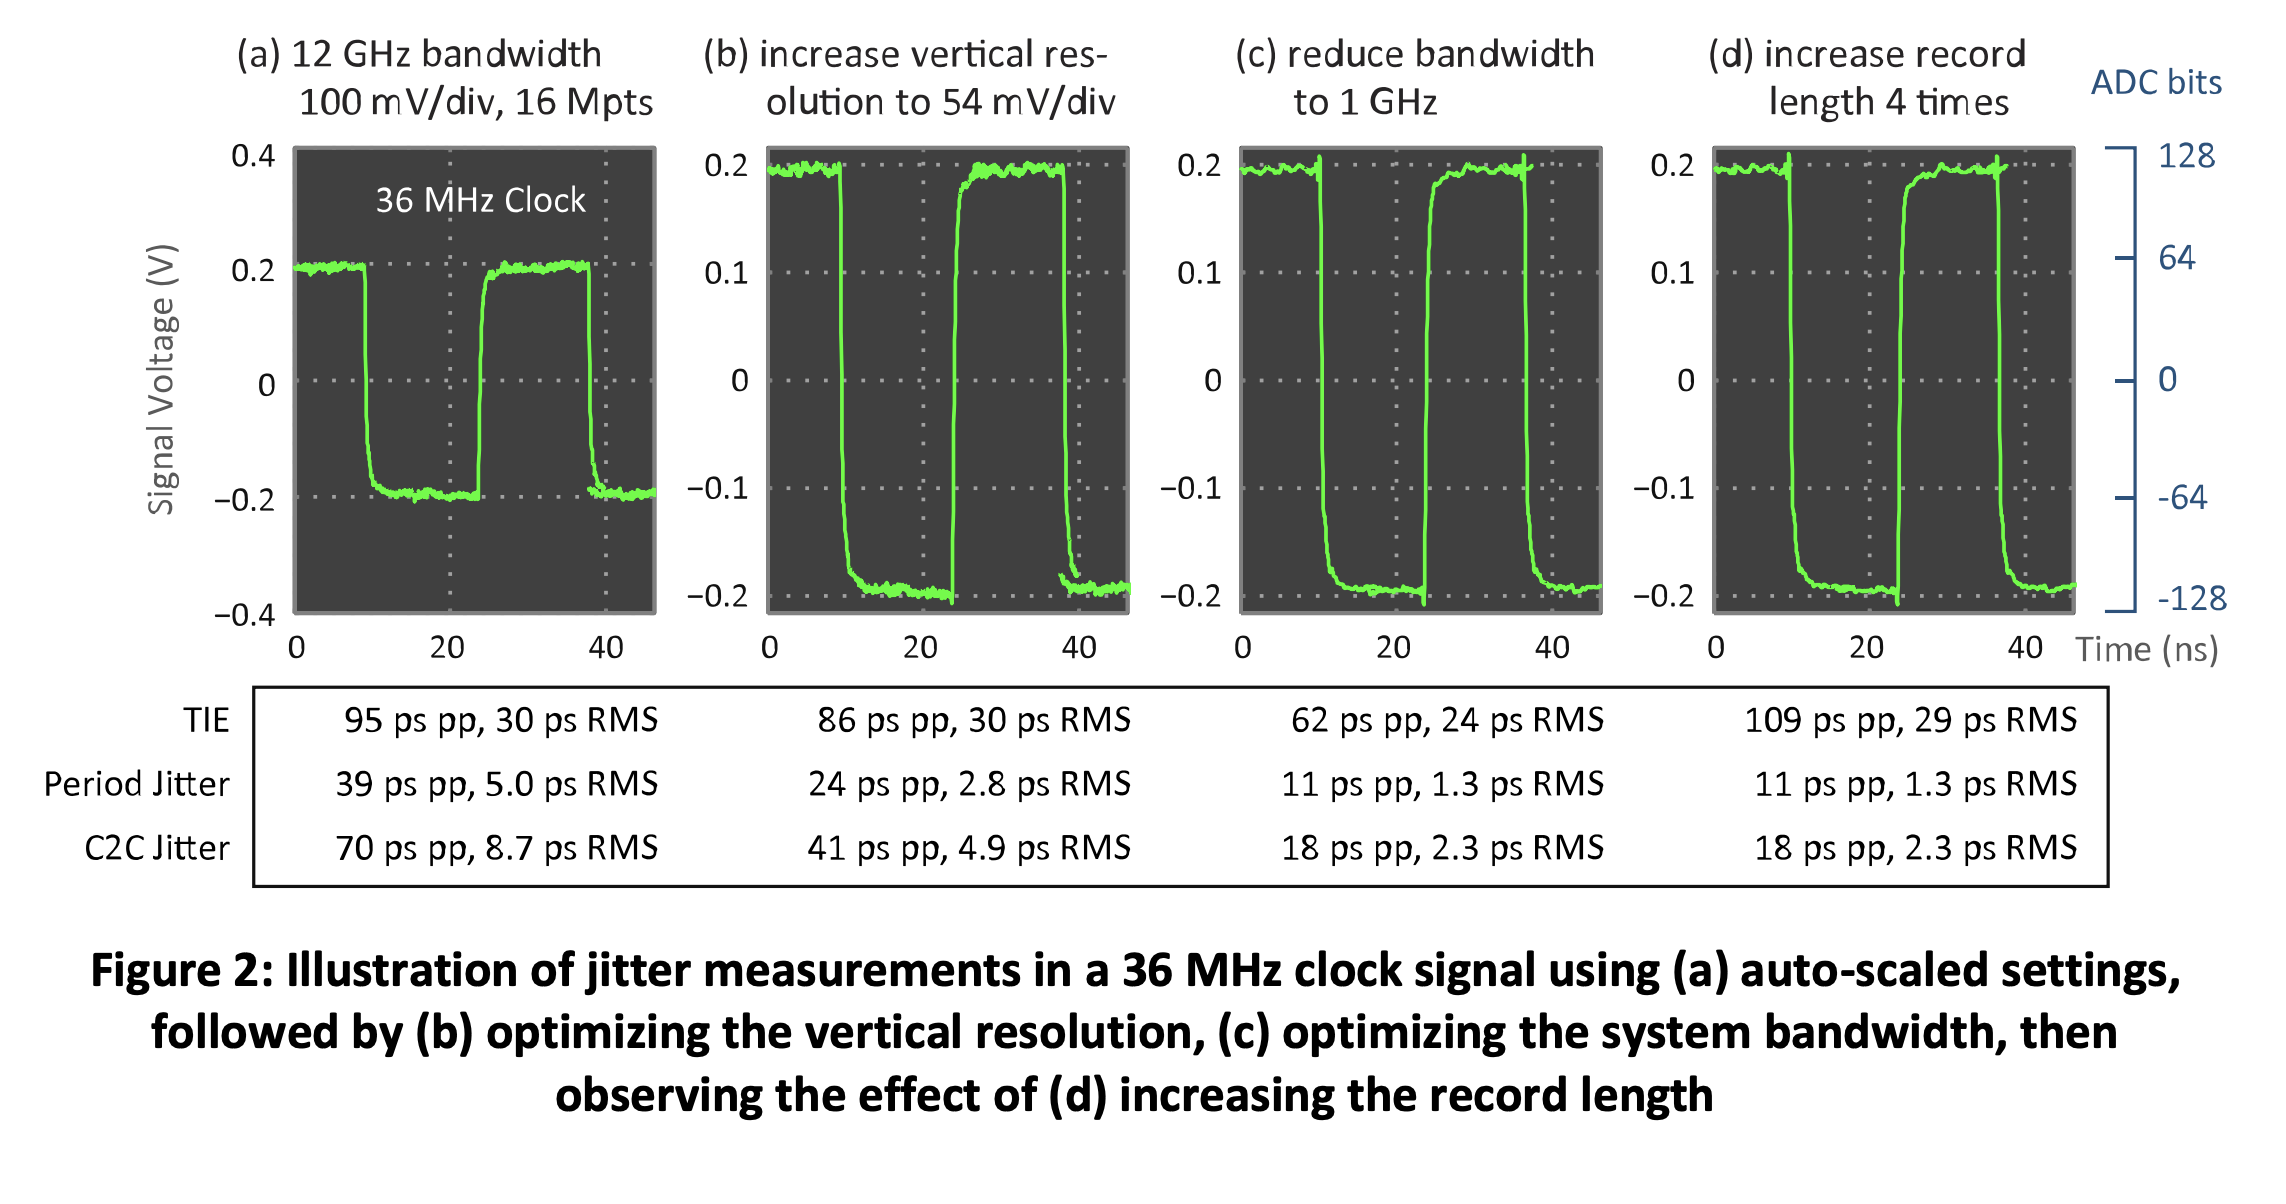 Figure 2 Illustration of jitter measurements in a 36 MHz clock signal